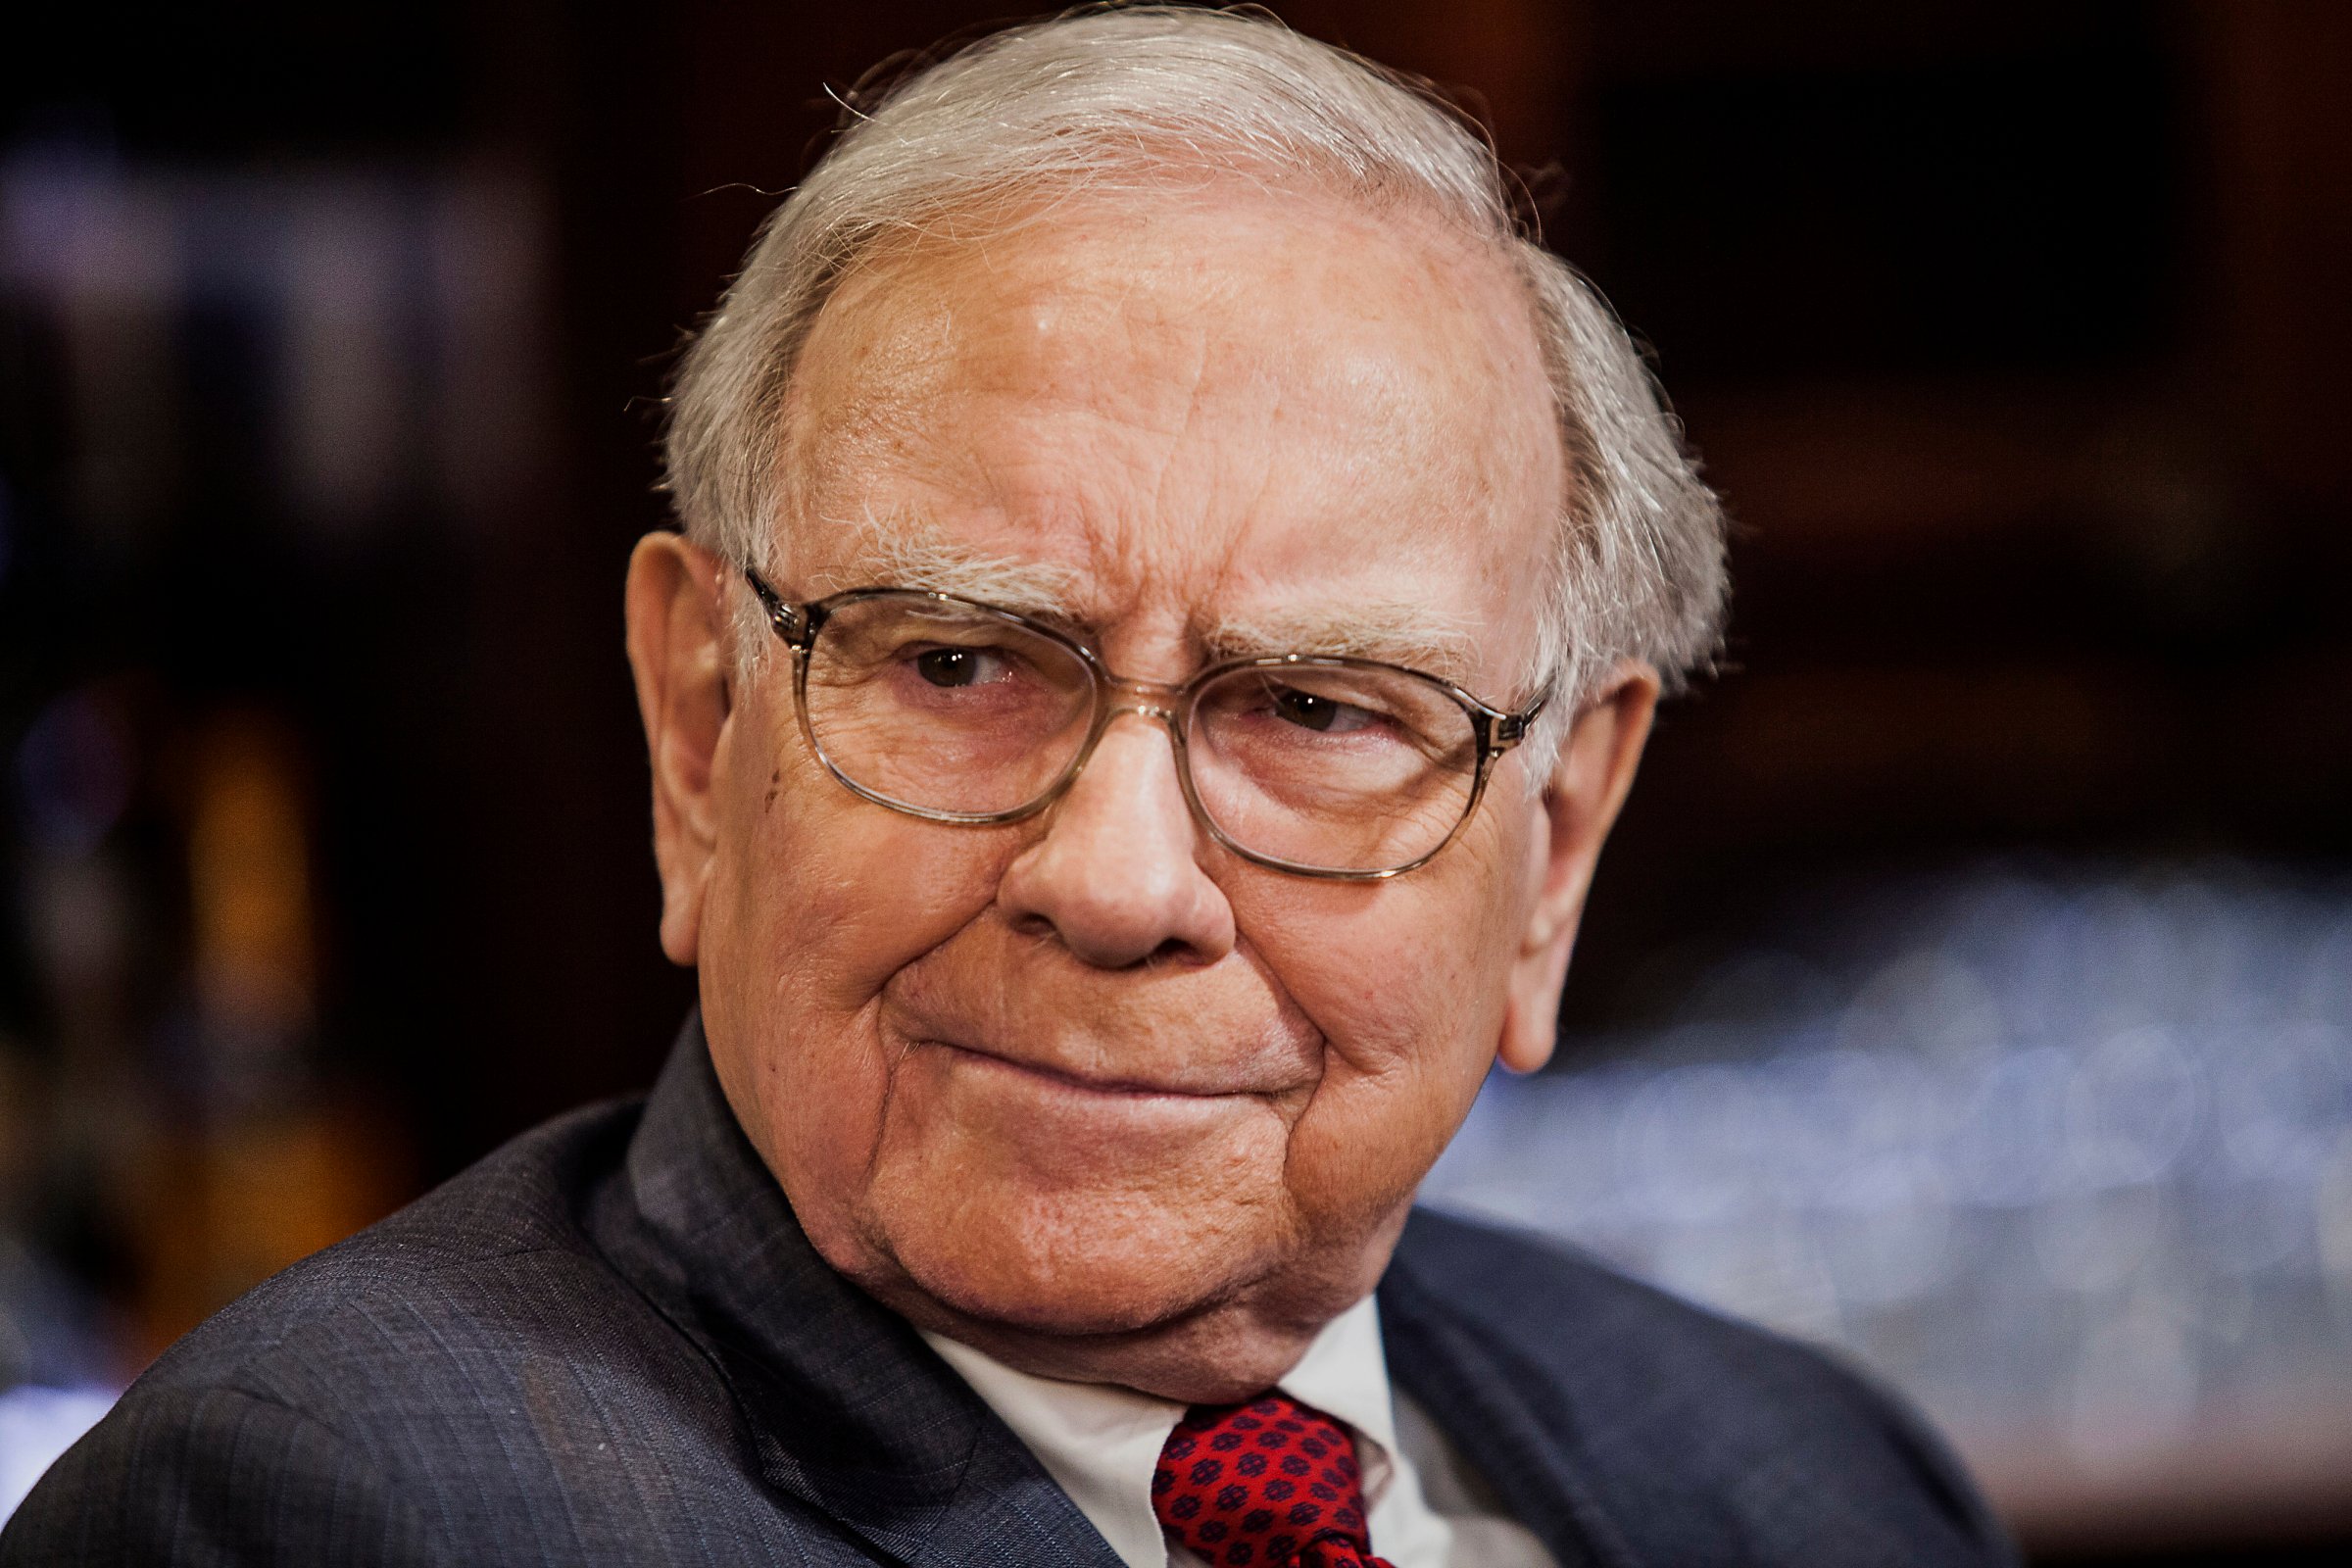 Warren Buffet during a Bloomberg Television Interview in New York City on April 23, 2014.